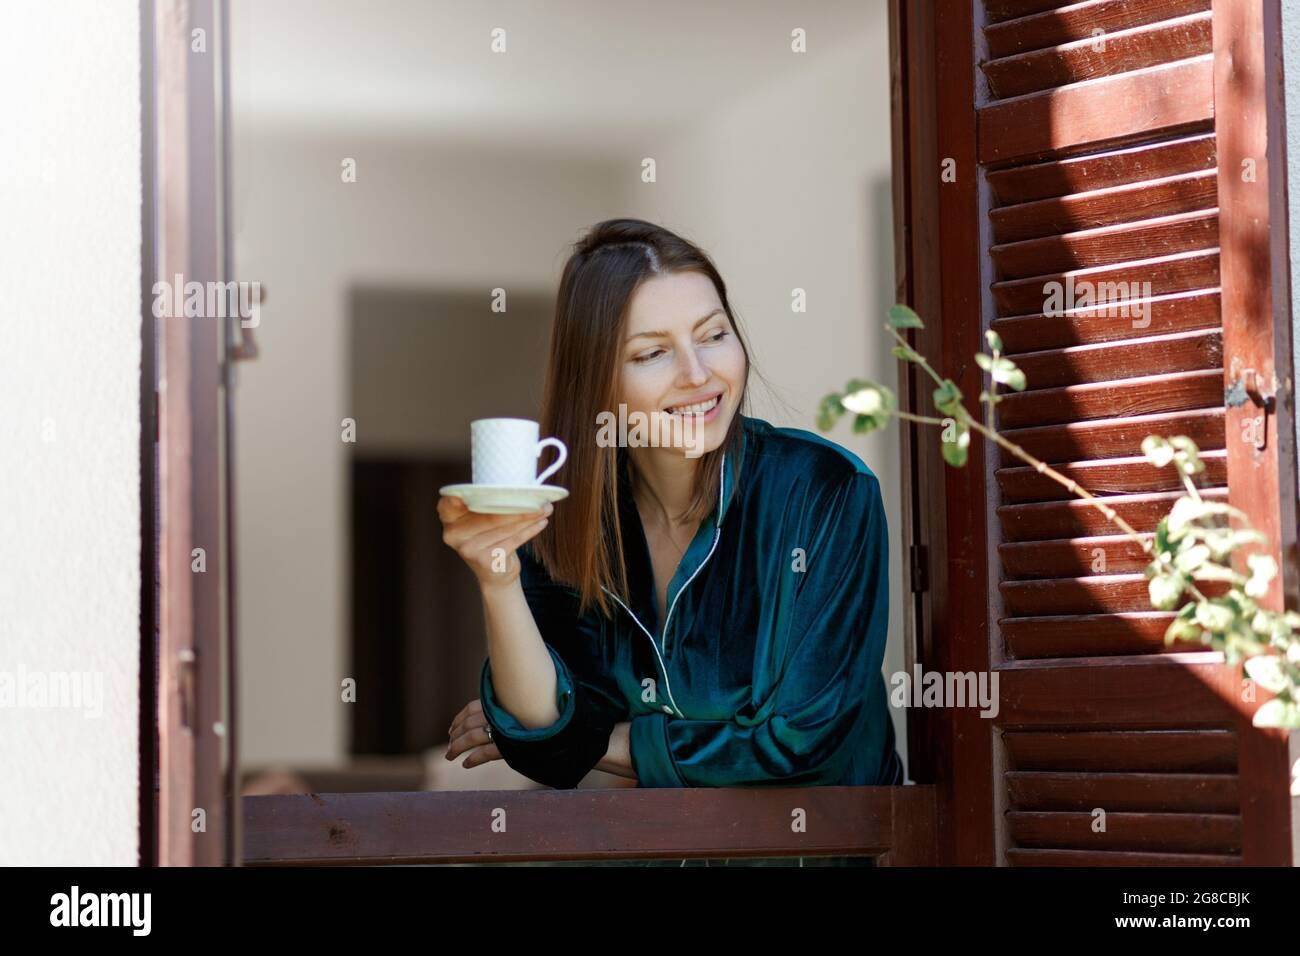 https://c8.alamy.com/comp/2G8CBJK/woman-in-pajamas-drinks-morning-coffee-near-window-with-shutters-beginning-of-a-new-day-hot-drink-after-breakfast-happy-morning-in-italy-enjoy-mom-2G8CBJK.jpg